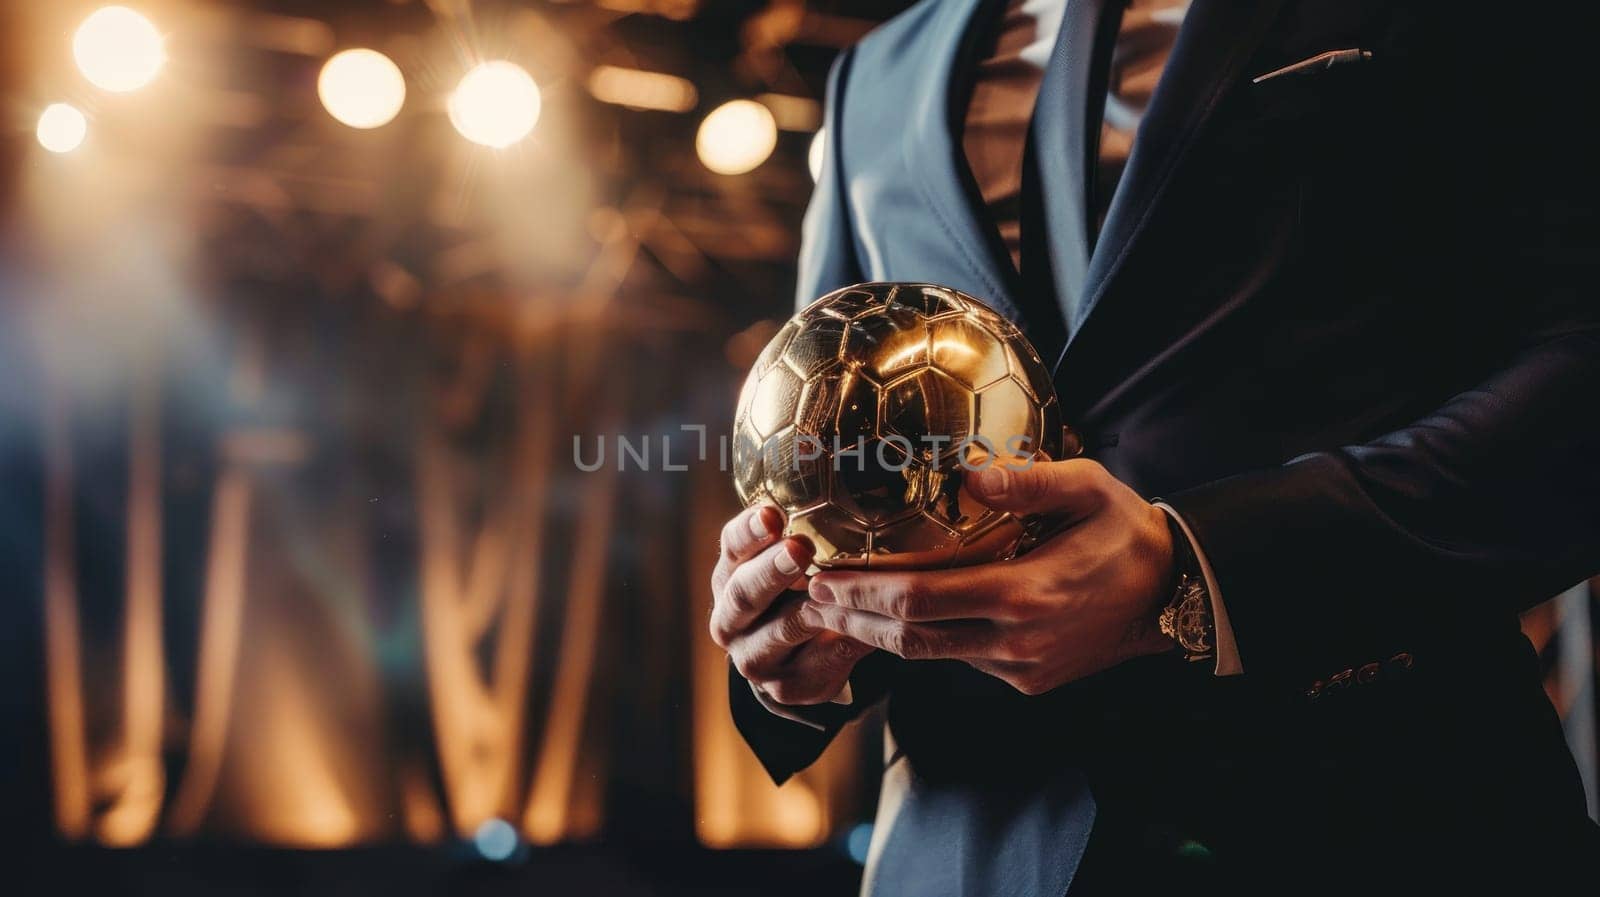 A man is holding a gold soccer ball in his hand. Concept of achievement and success, as the man is dressed in a suit and tie, which is typically associated with formal events and accomplishments